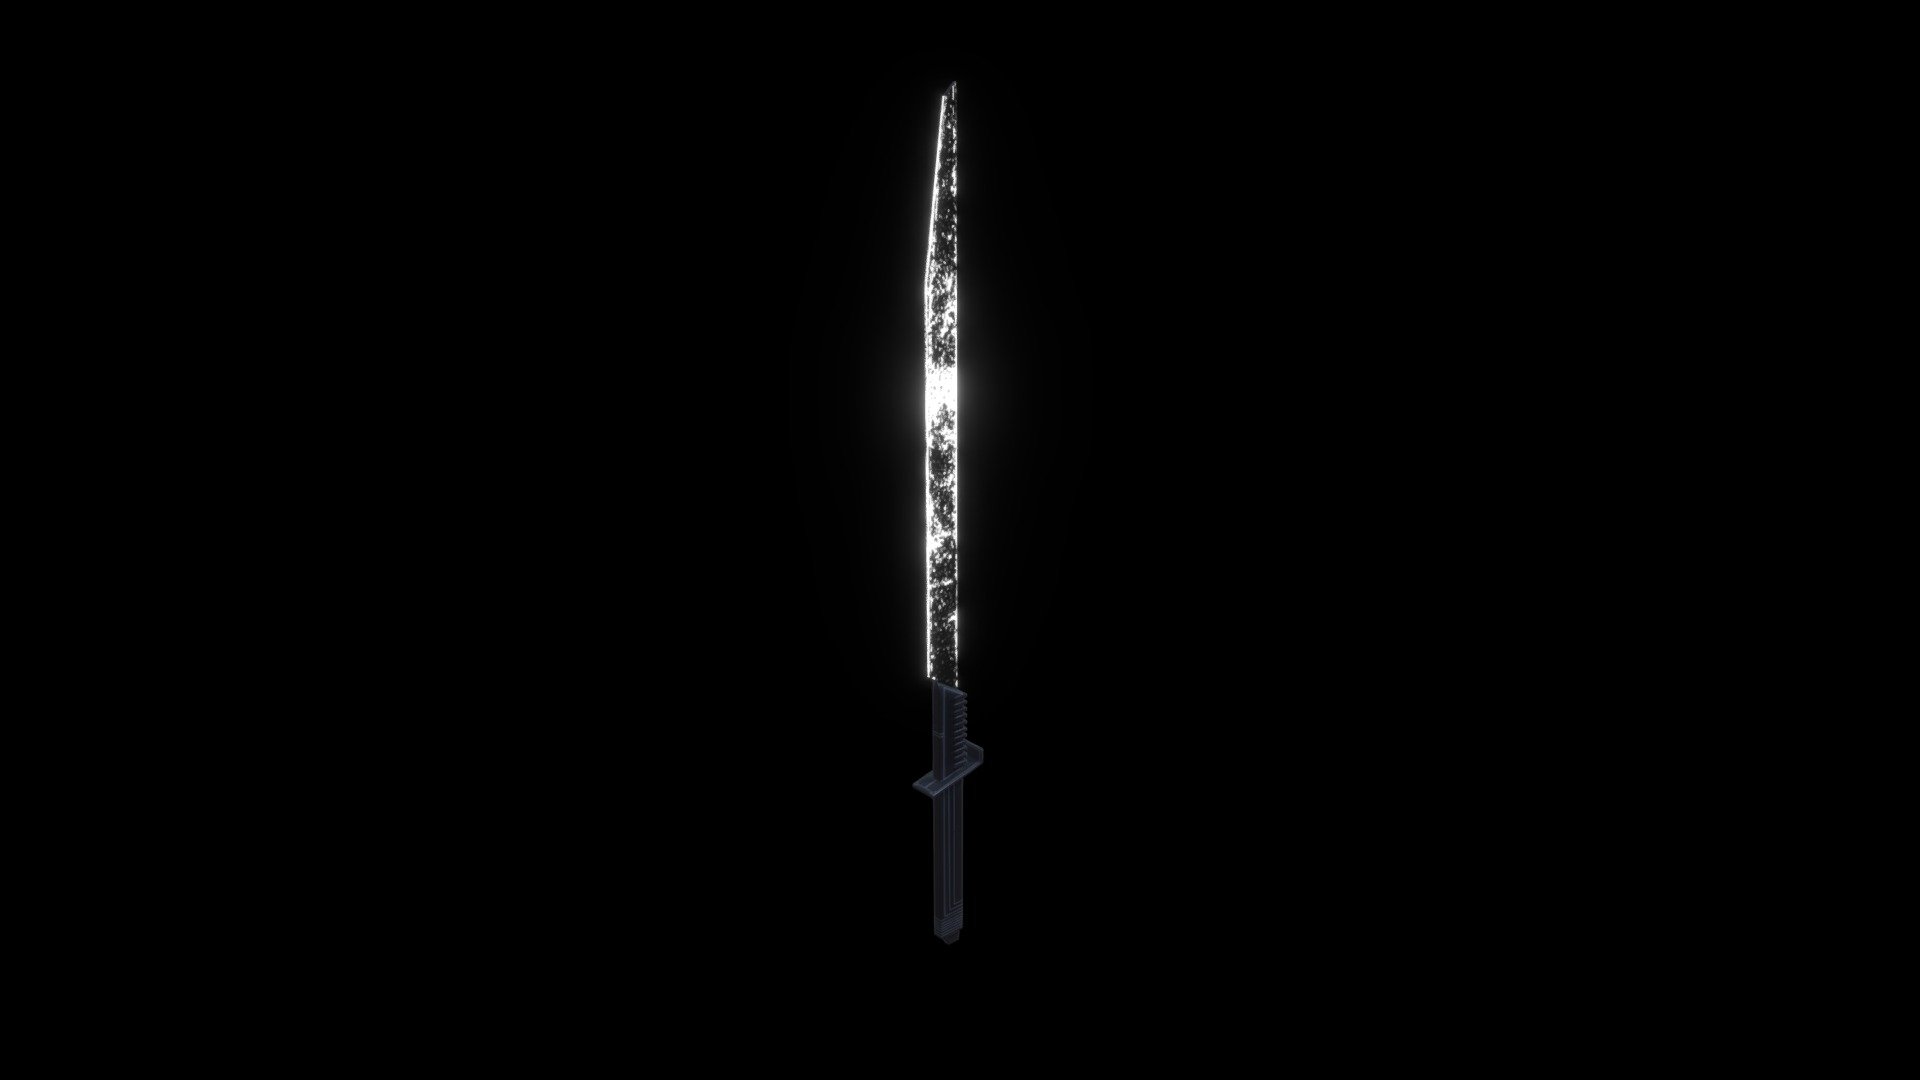 Lightsaber from the universe of Star Wars (Clone Wars, The Mandalorian), owned by Darth Maul, Bo-Katan and Moff Gideon. 

Low poly model for videogames and VR 3d model